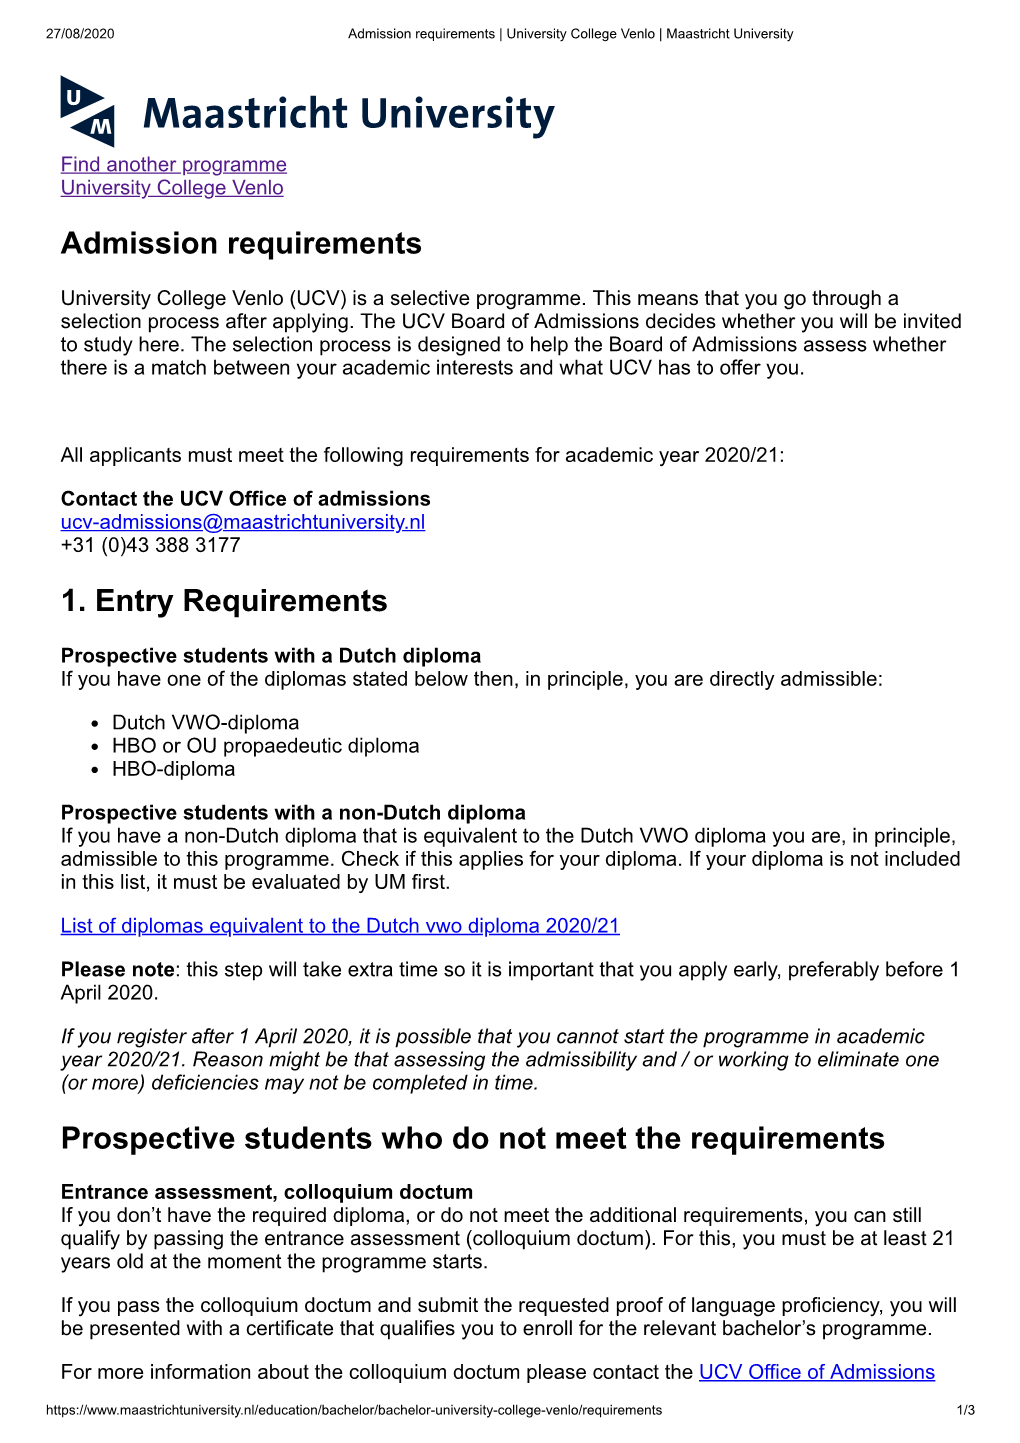 Admission Requirements 1. Entry Requirements Prospective Students